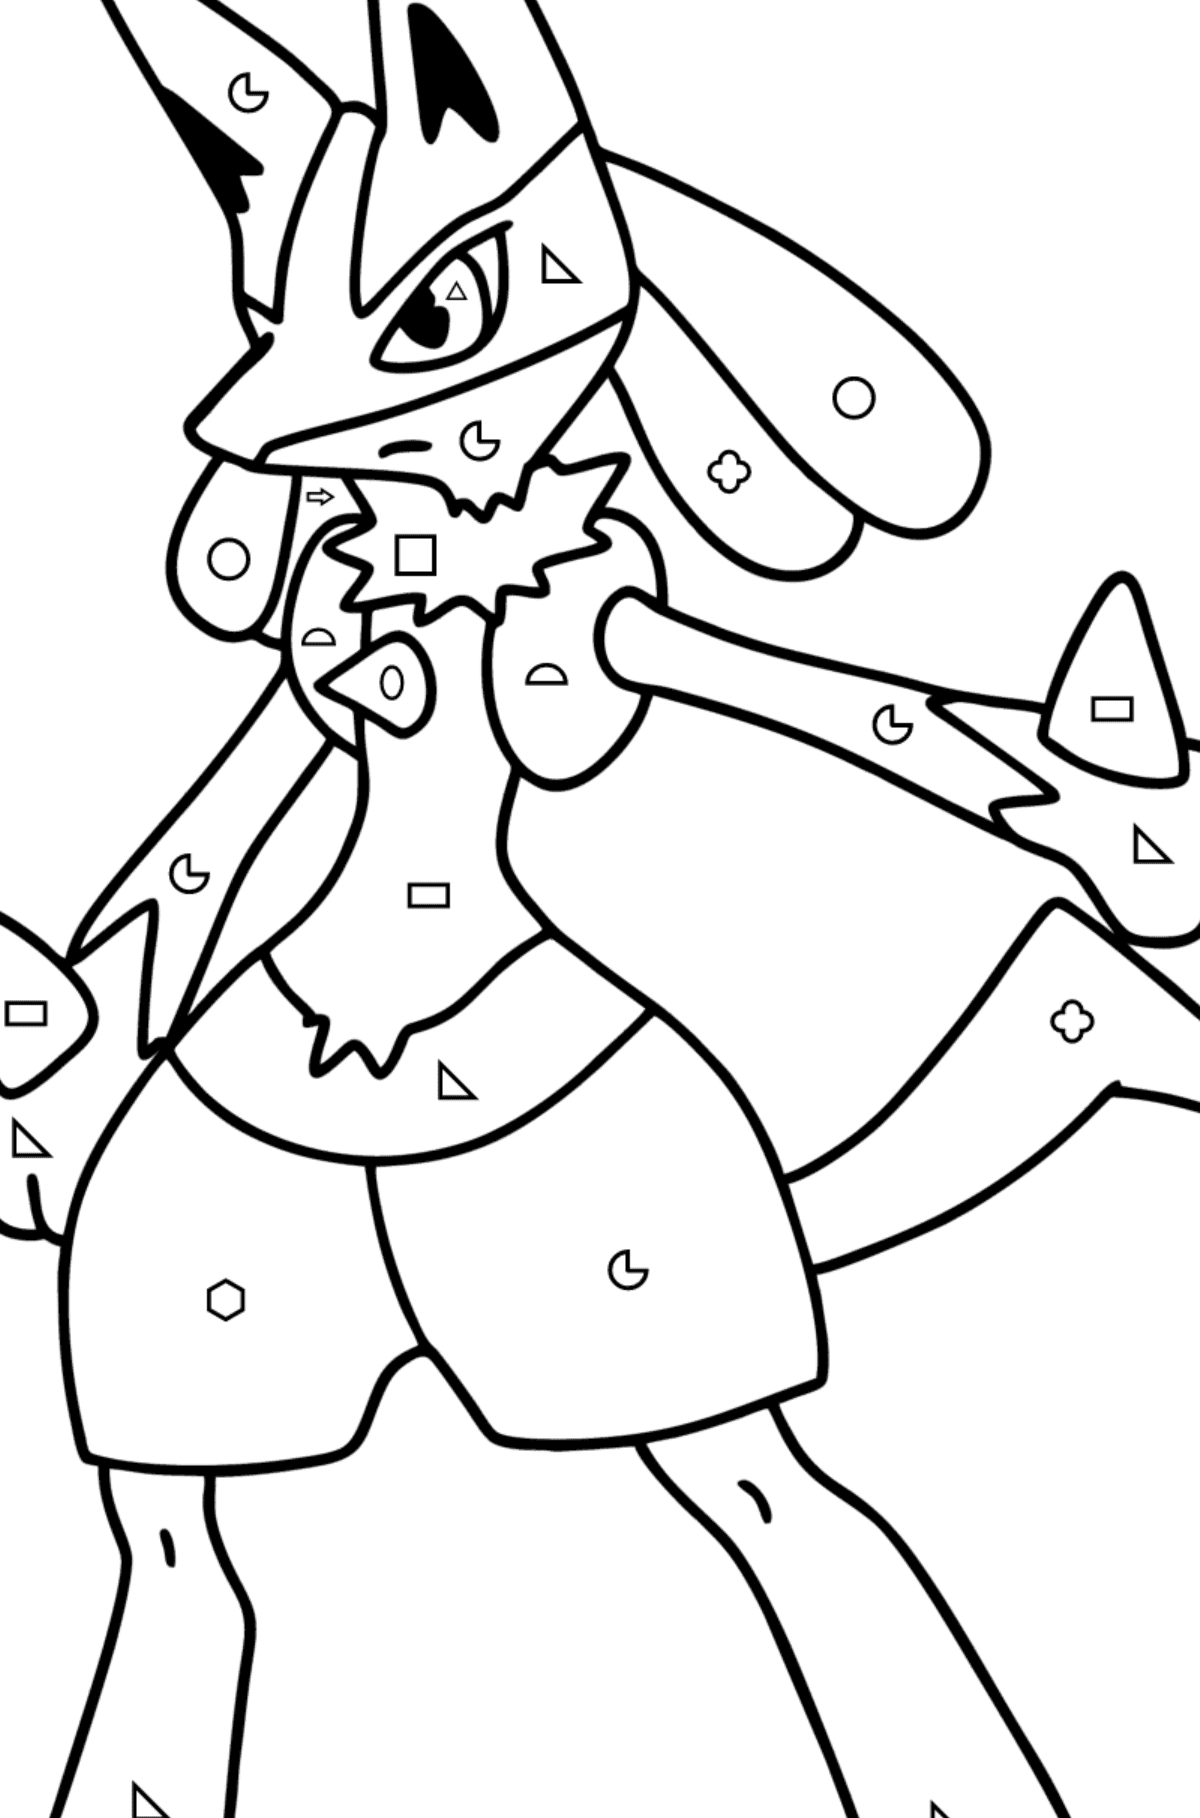 Coloring page Pokemon Go Lucario - Coloring by Geometric Shapes for Kids